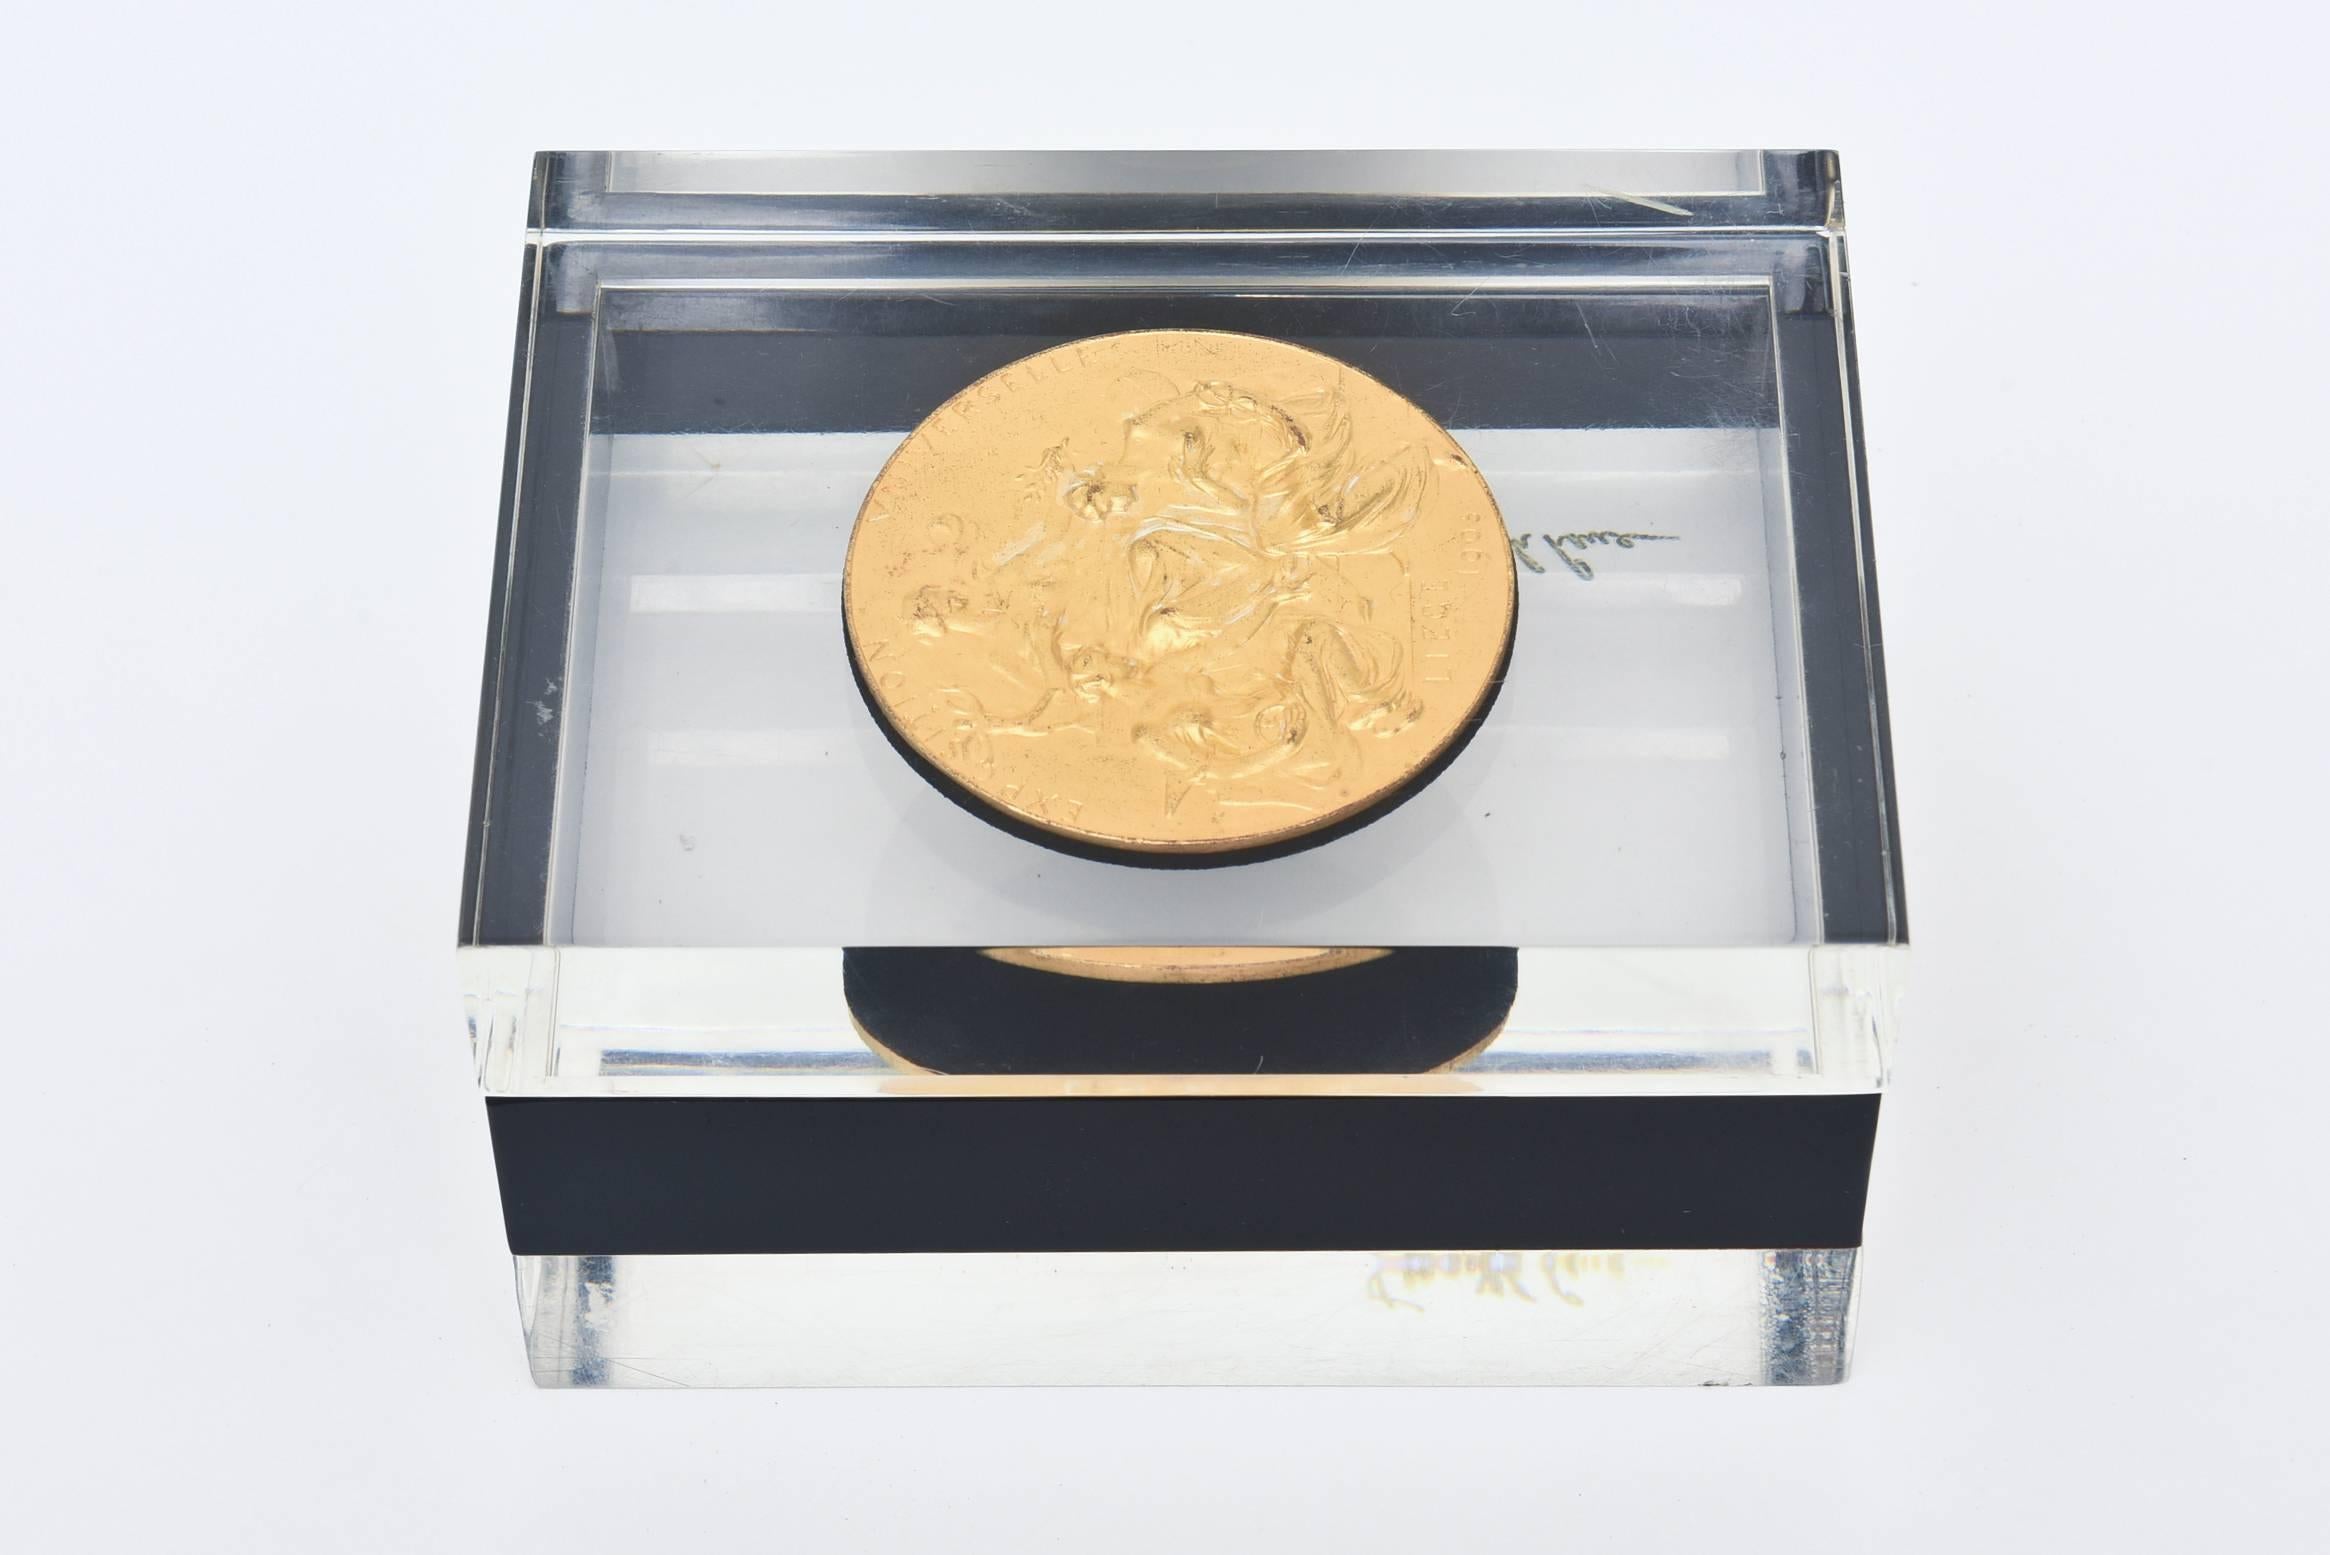 This amazing and stellar lucite and bronze box is two parts.
The clear, black and then clear layers make for a great reflection. The French bronze medallion on the top is old world meets modern. The french intaglio bronze medallion reads